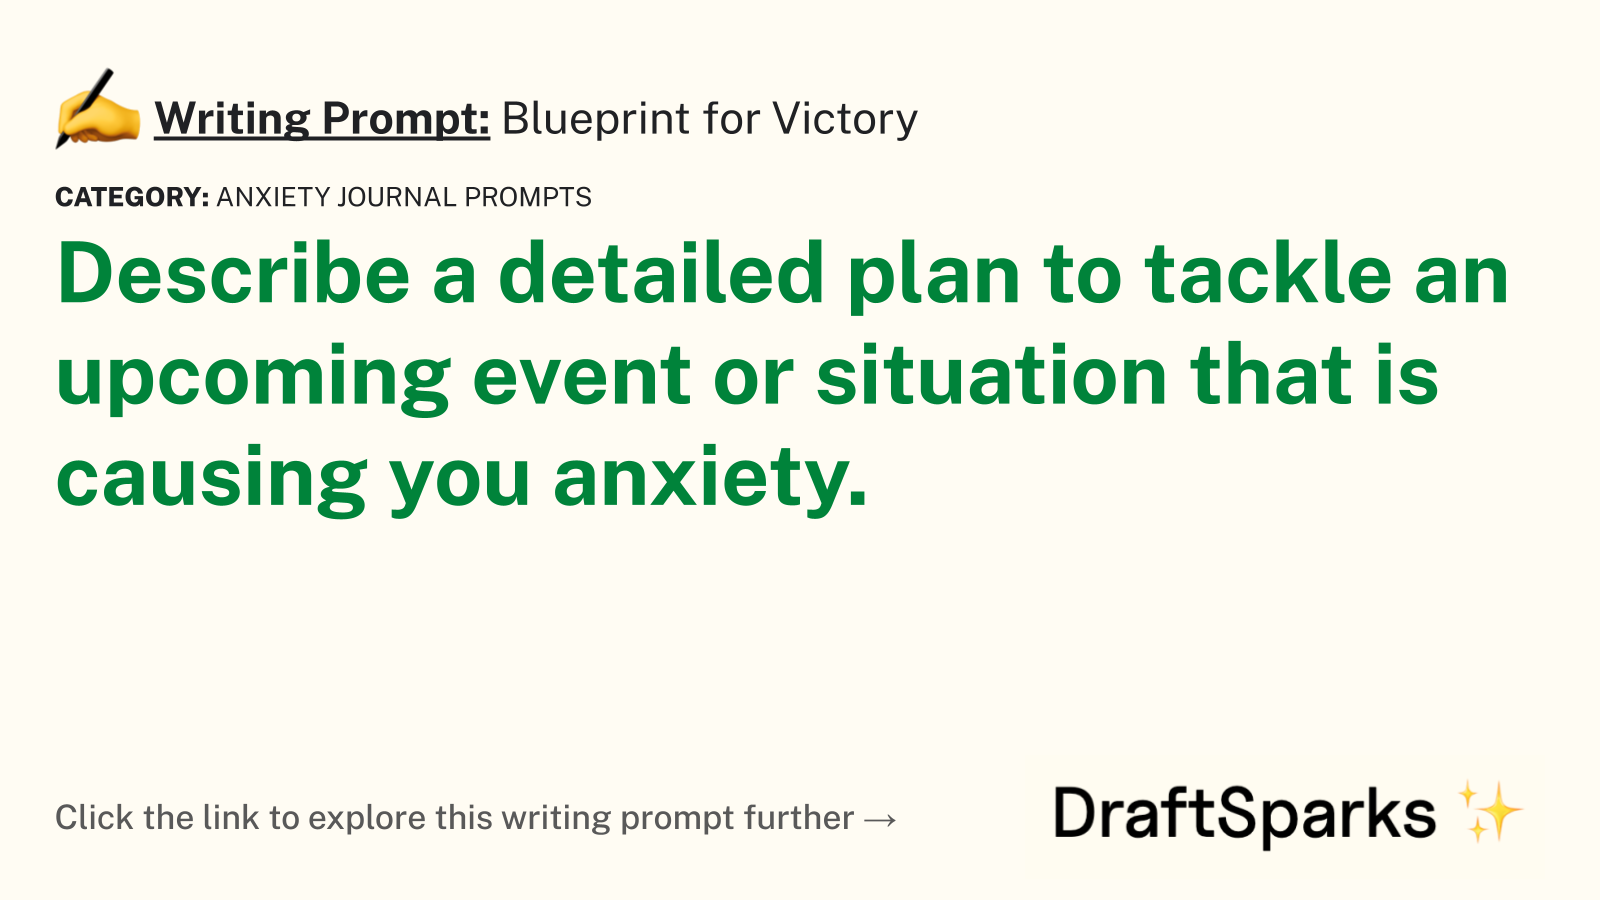 Blueprint for Victory